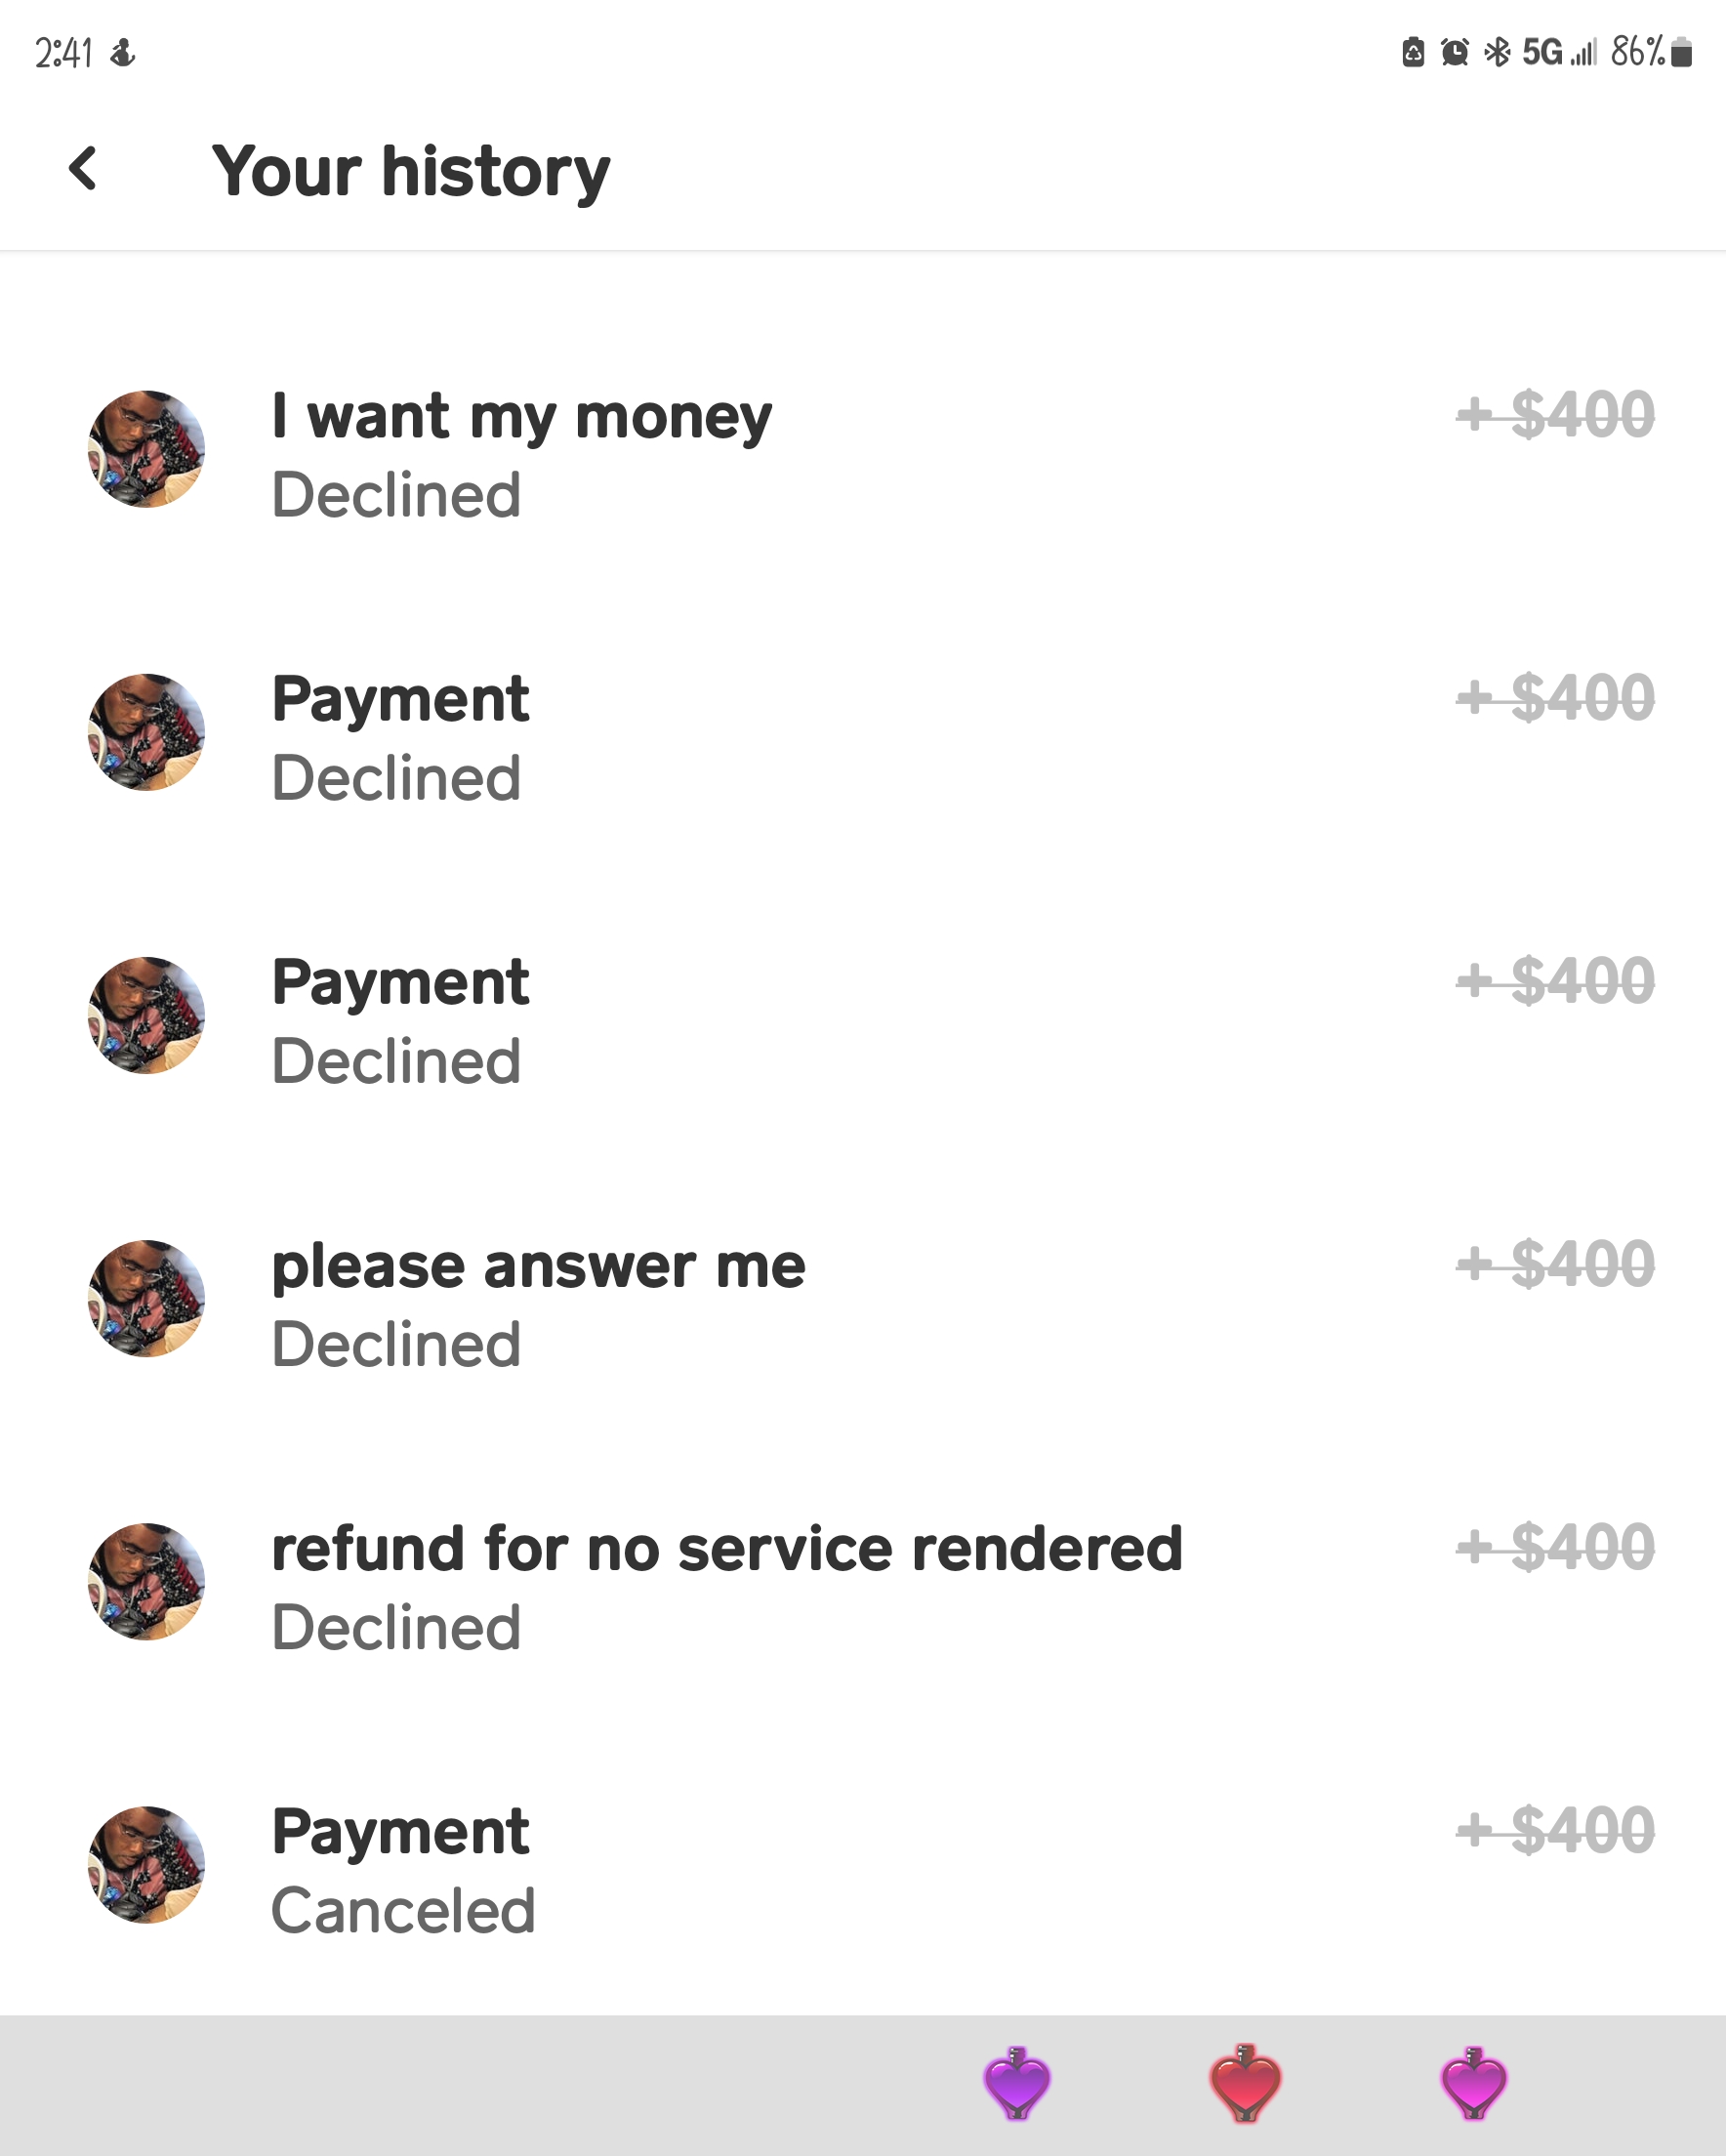 Where he declined refund or pymt 